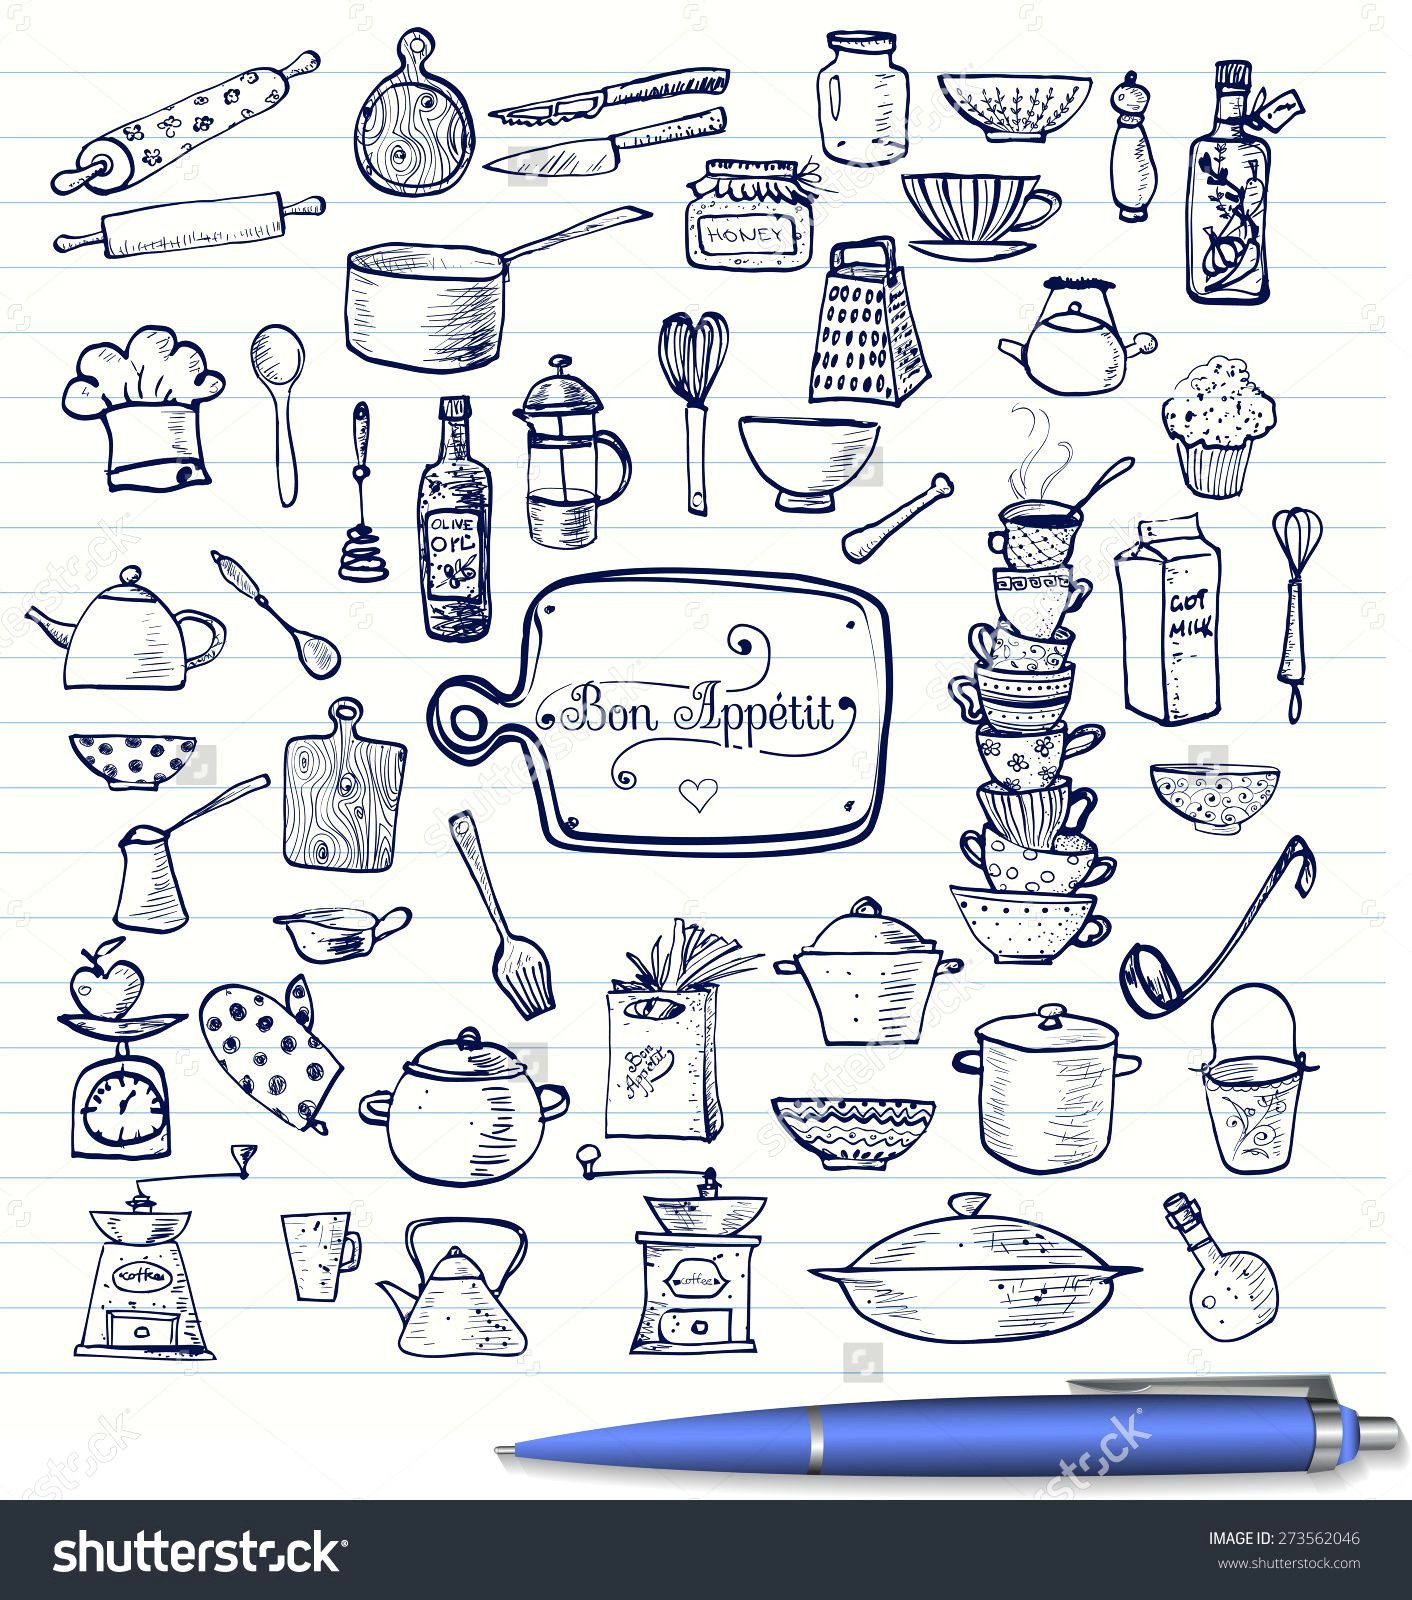 Drawings Of Big Hands Big Set Of Kitchen Utensils Sketches Hand Drawn with Ink Cups